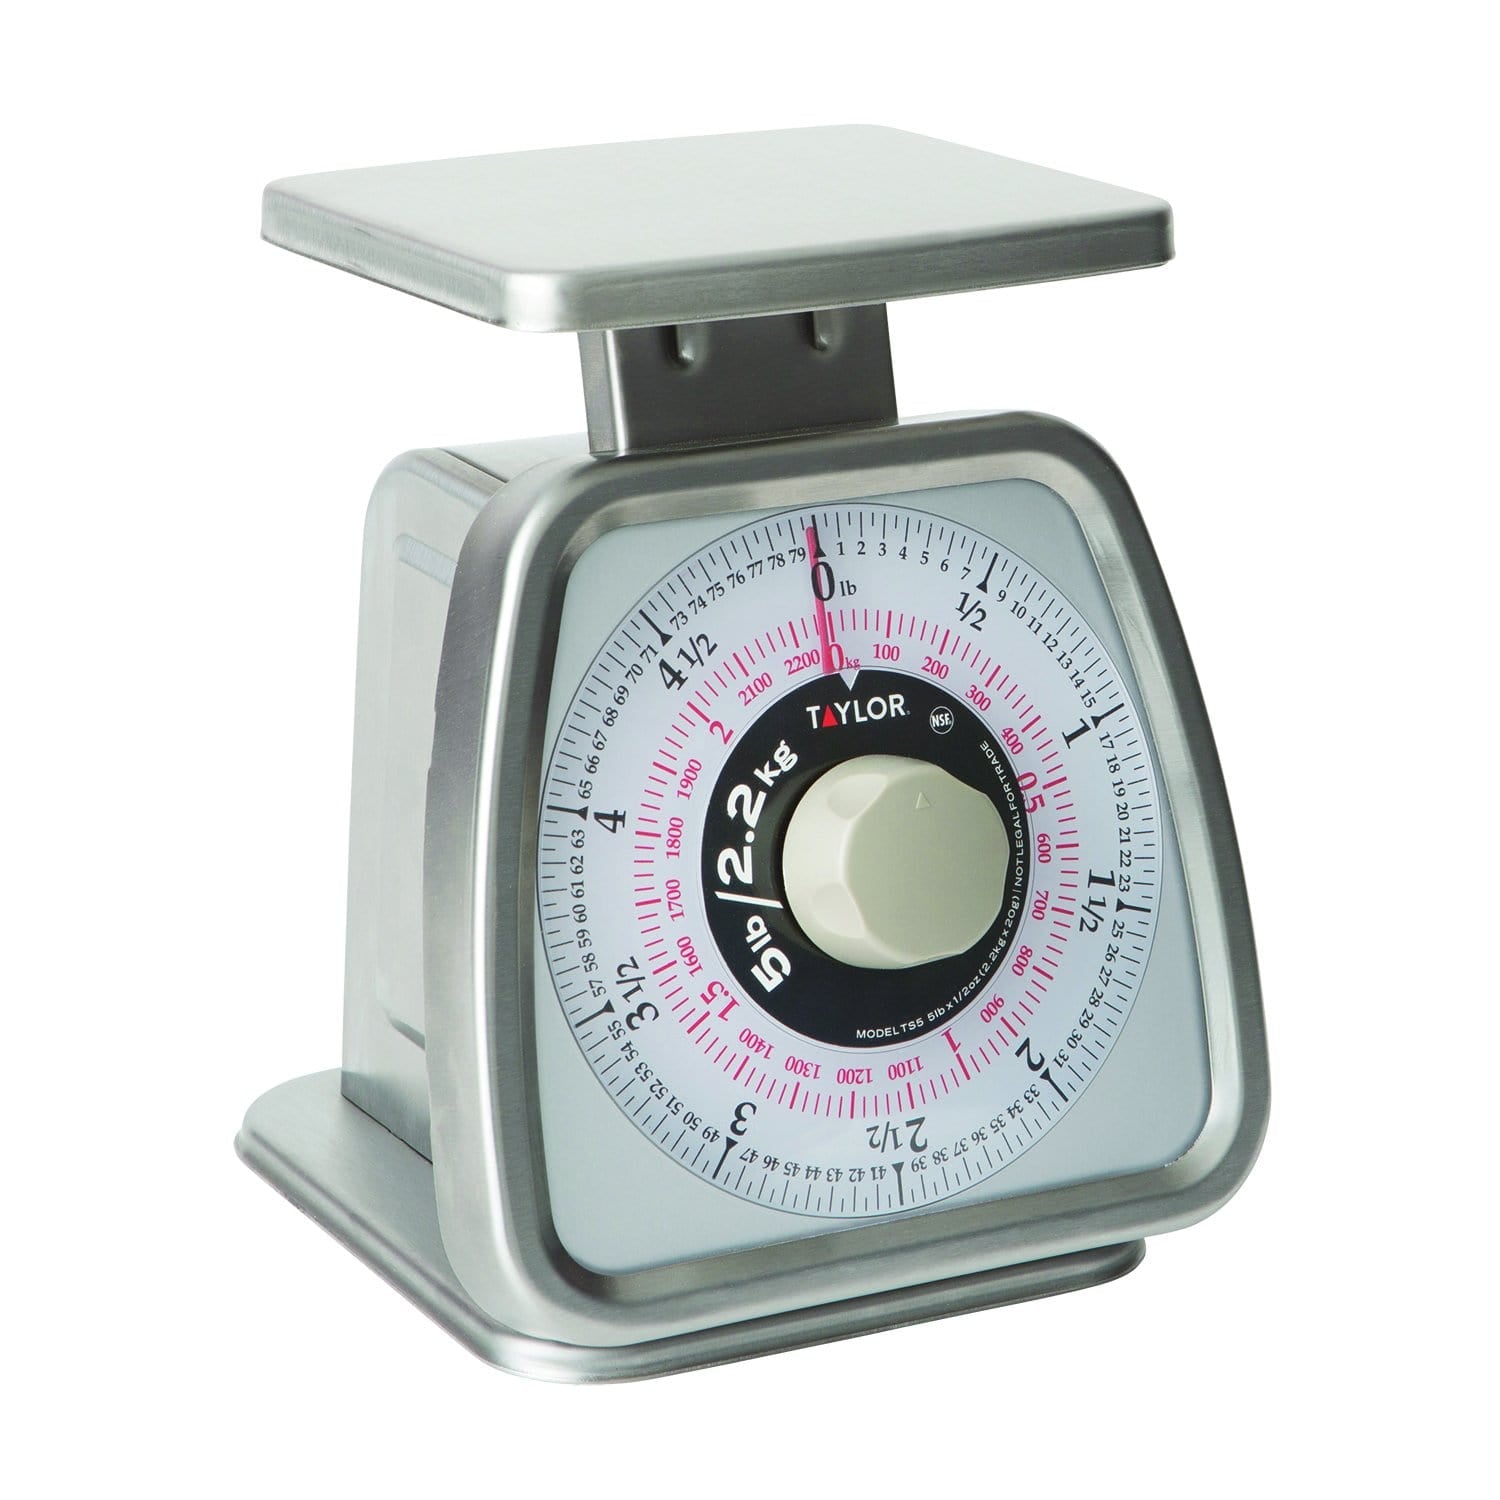 Conair ExtraLarge Dial Analog Precision Scale *** Want to know